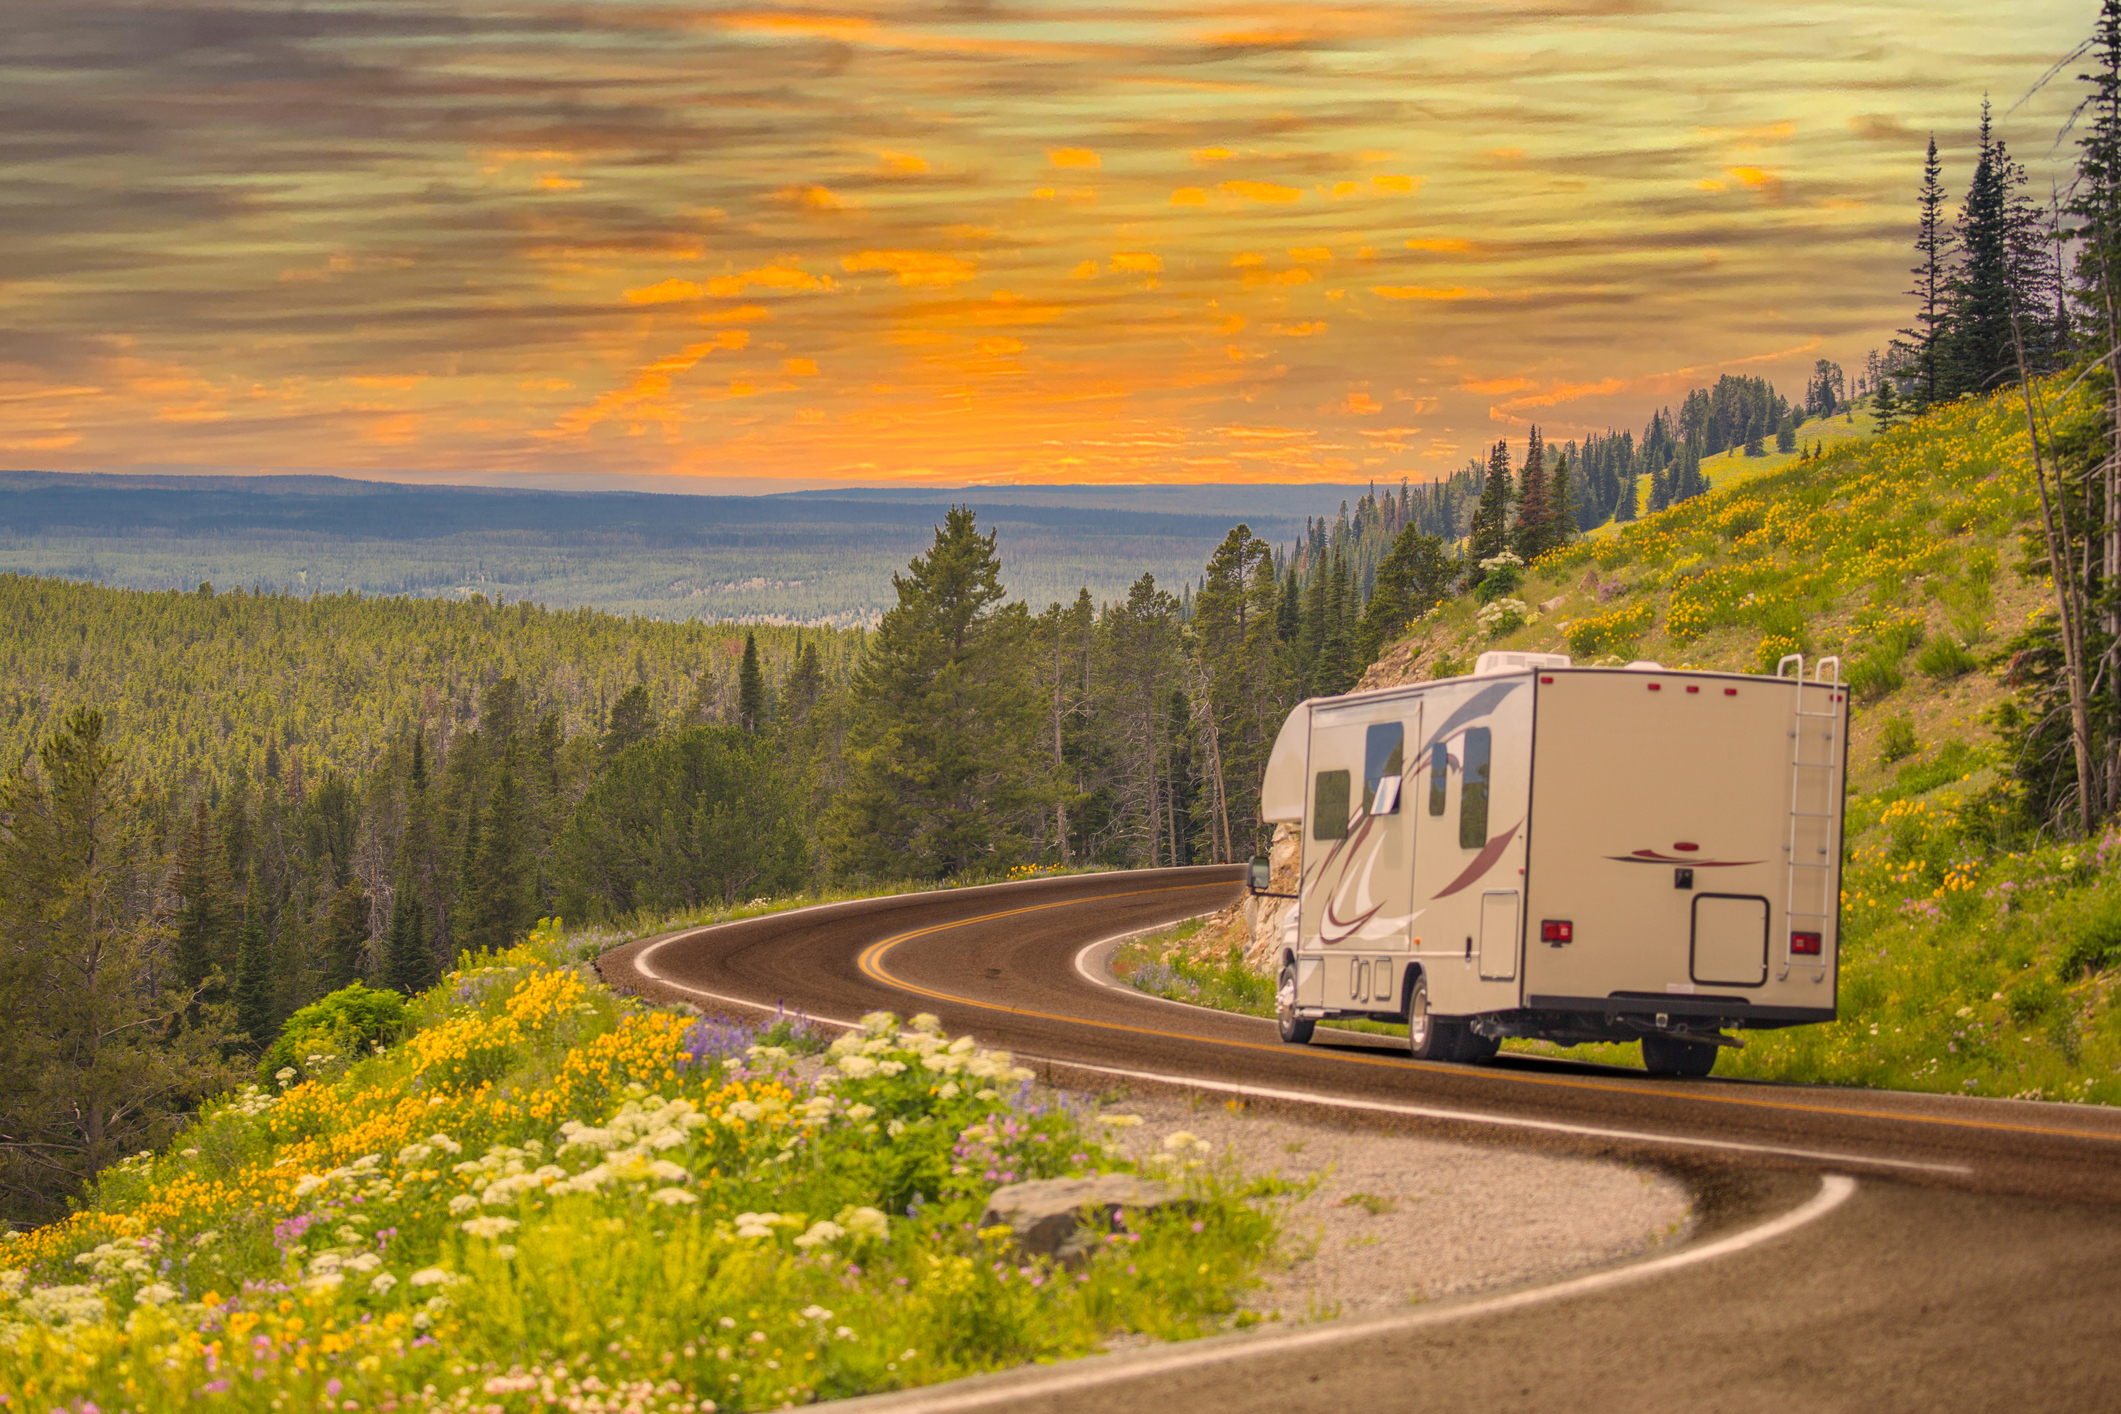 Camper Driving Down Road in The Beautiful Countryside Among Pine Trees and Flowers. (Photo: iStock - Feverpitched)